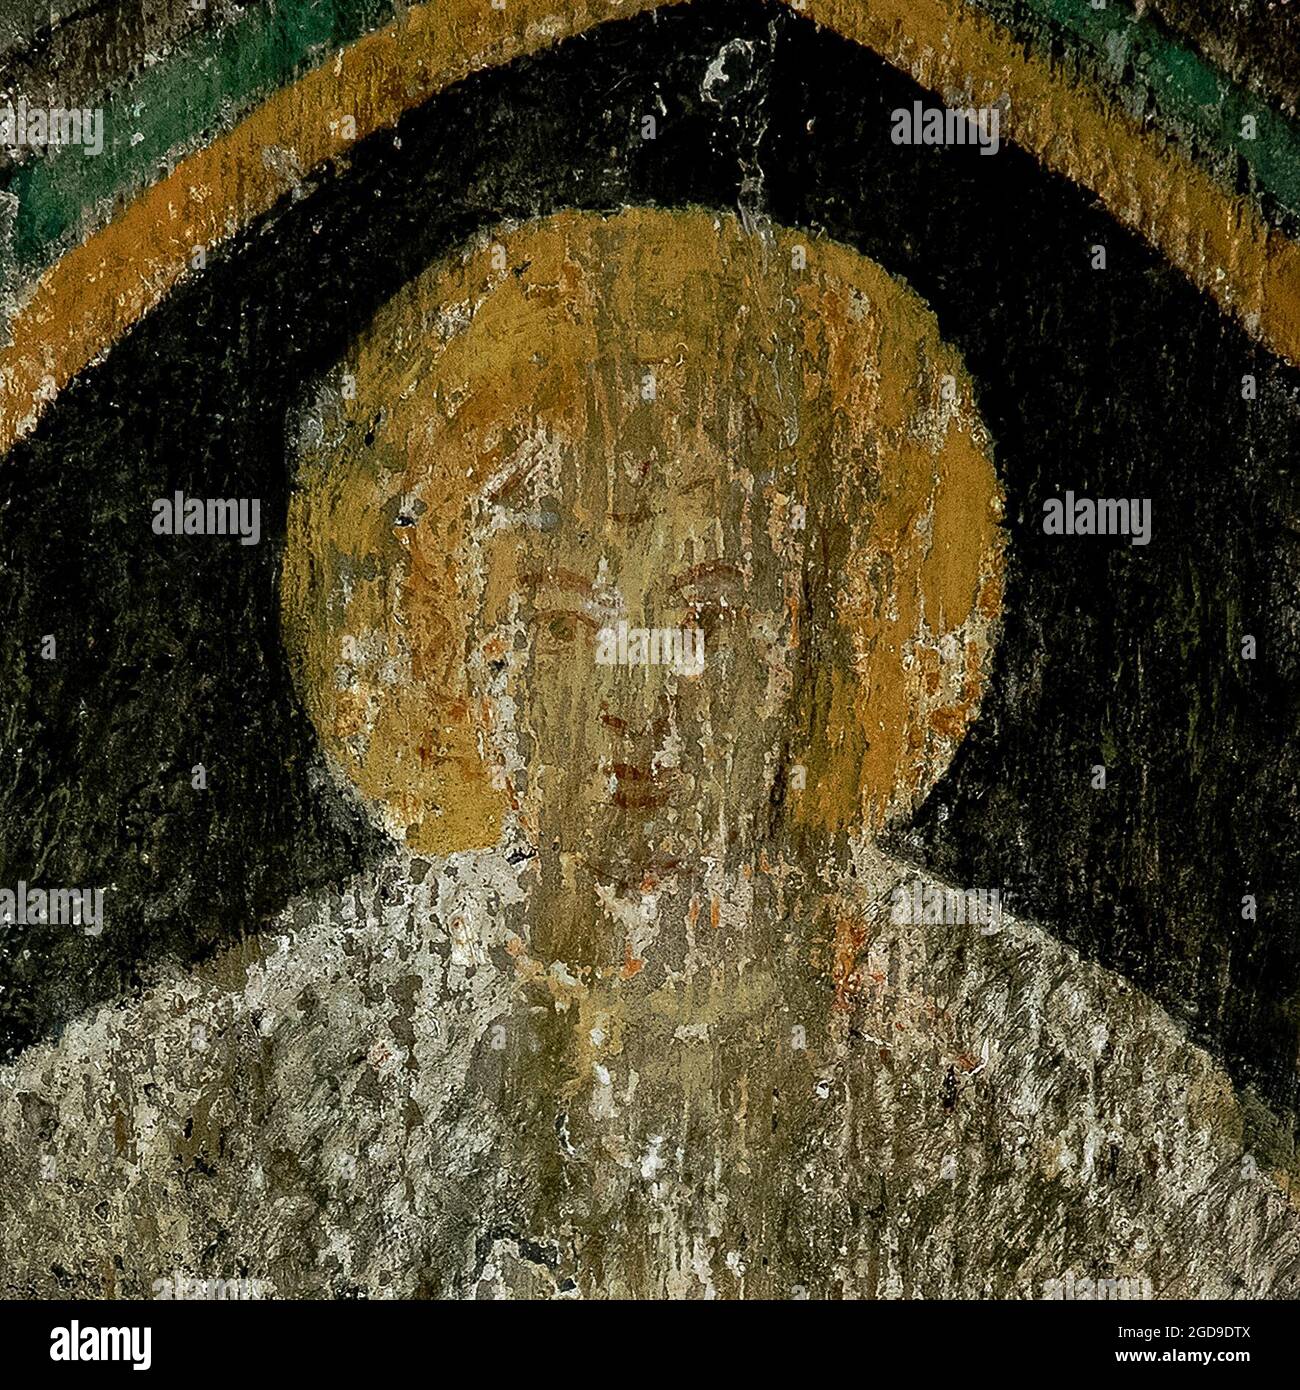 Square portrait of an angel, a faded fresco face painted in about 1400 on the underside of a rounded Romanesque window arch in the Blasiuskapelle or Chapel of Saint Blaise in the Burggarten or Castle Garden at Rothenburg ob der Tauber, Bavaria, Germany.   The fresco was painted when the chapel was formed from a remnant, probably a reception hall, of the Hohenstaufen imperial fortress built by Konrad III, King of Germany.  The rest of the castle was destroyed by the Basel earthquake of 1356.  The chapel is now a memorial to the military dead of two world wars. Stock Photo